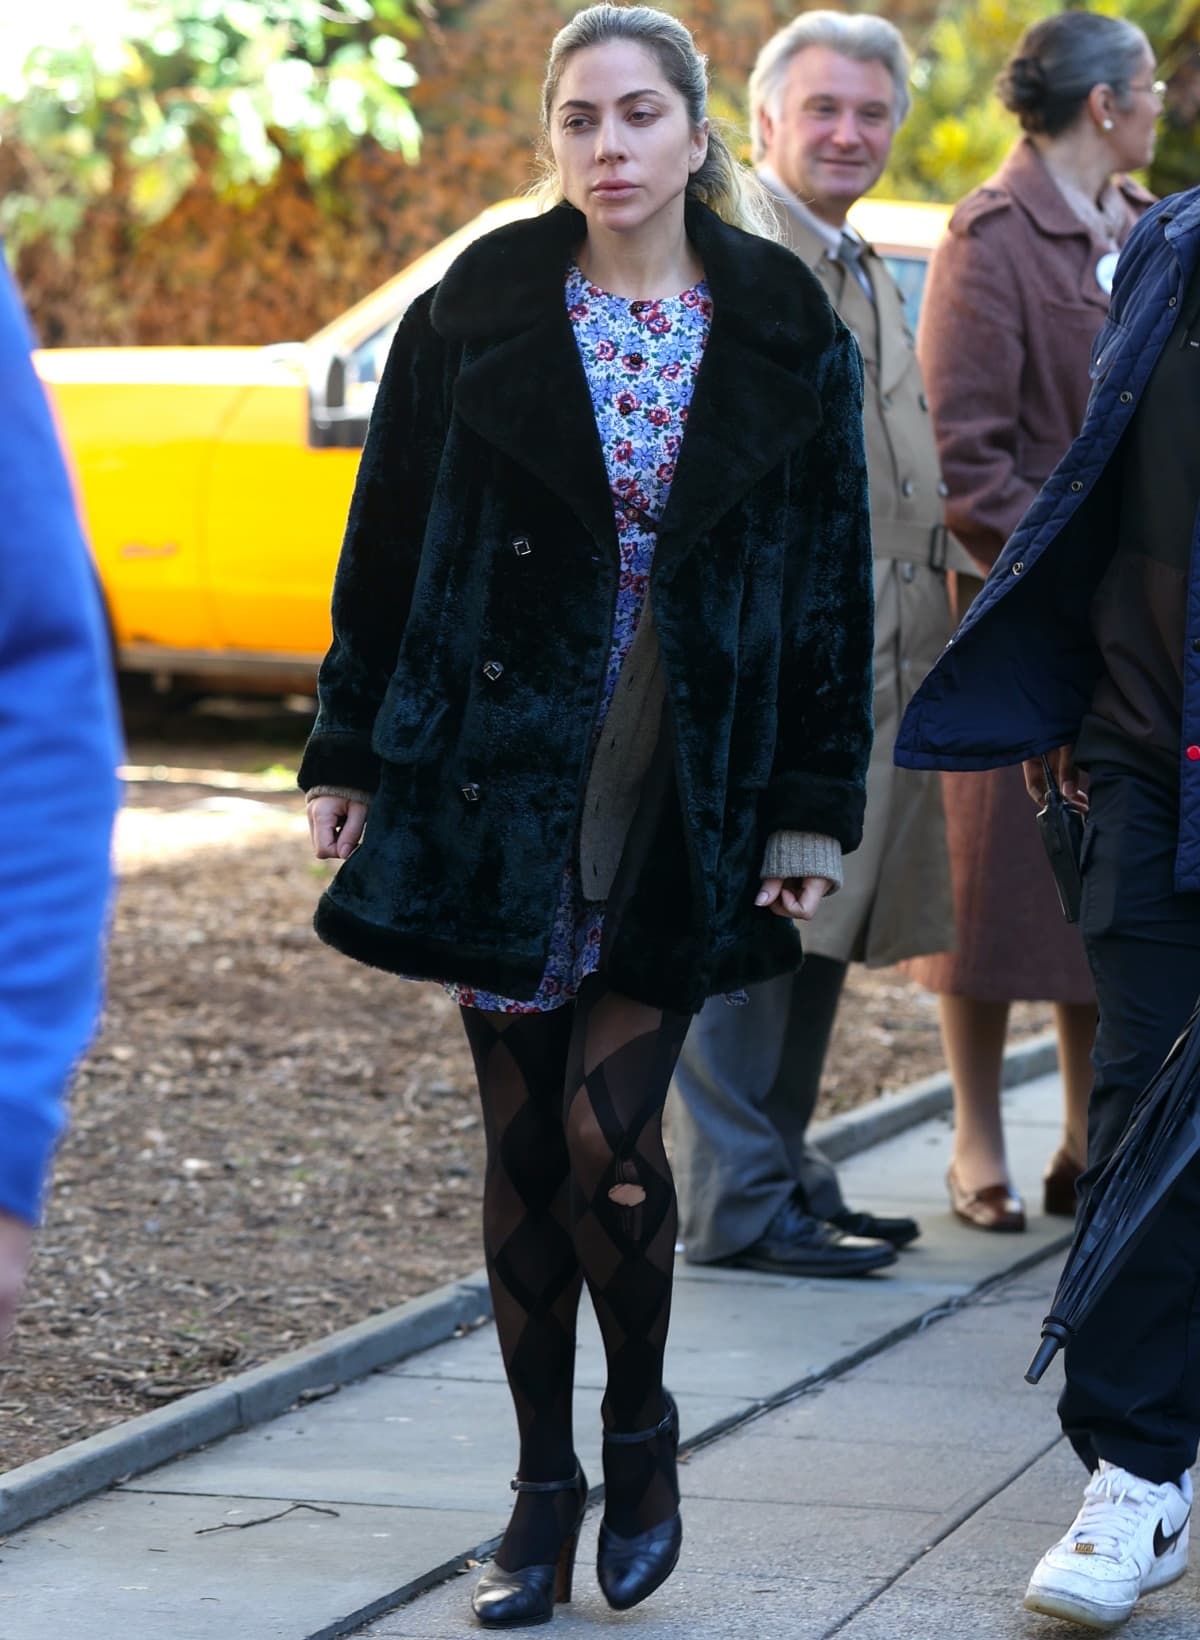 Lady Gaga wearing a crushed blue velvet coat over a floral-printed dress with black harlequin stockings and pointy-toe heels while filming Joker: Folie a Deux